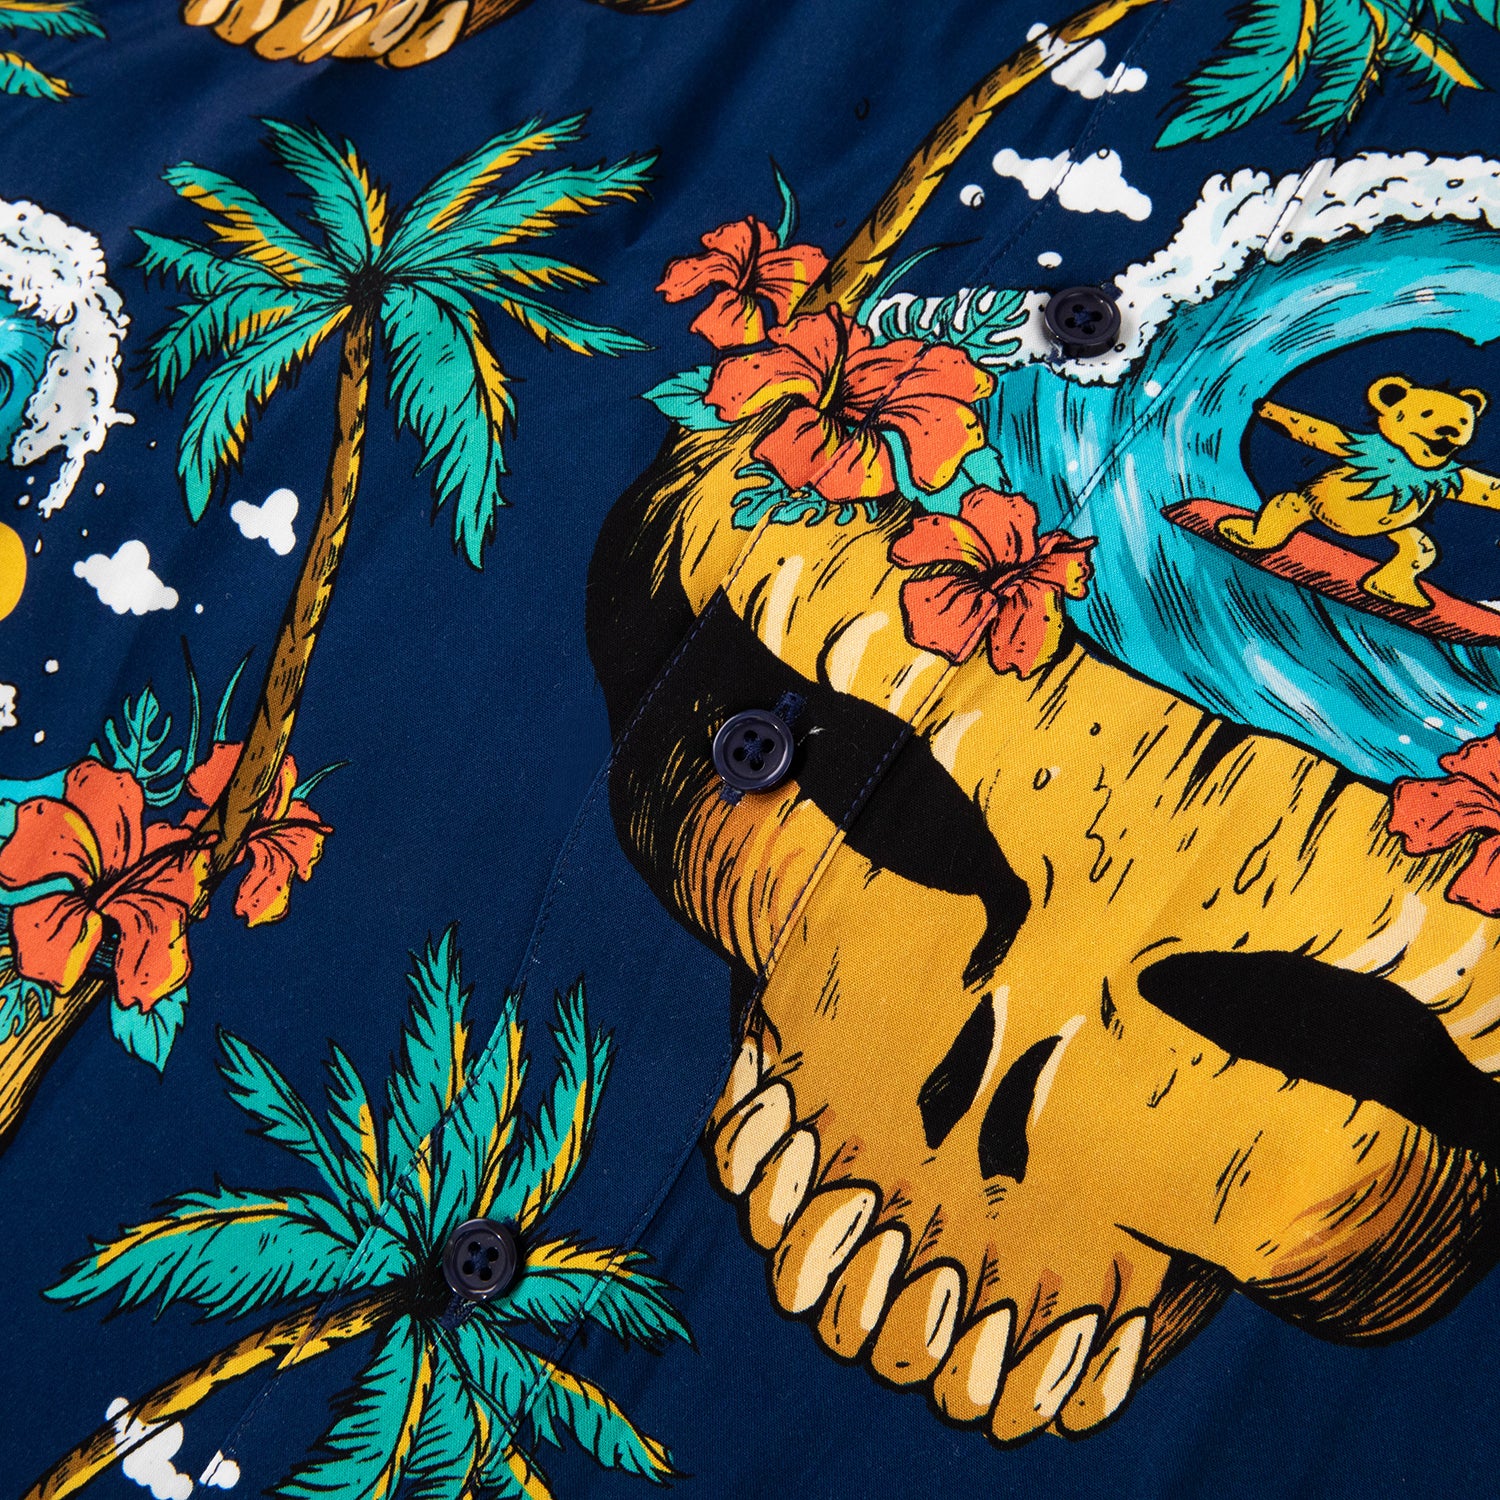 Grateful Dead Short Sleeve Button Down Surfing Stealie All Over Print Navy - Section 119